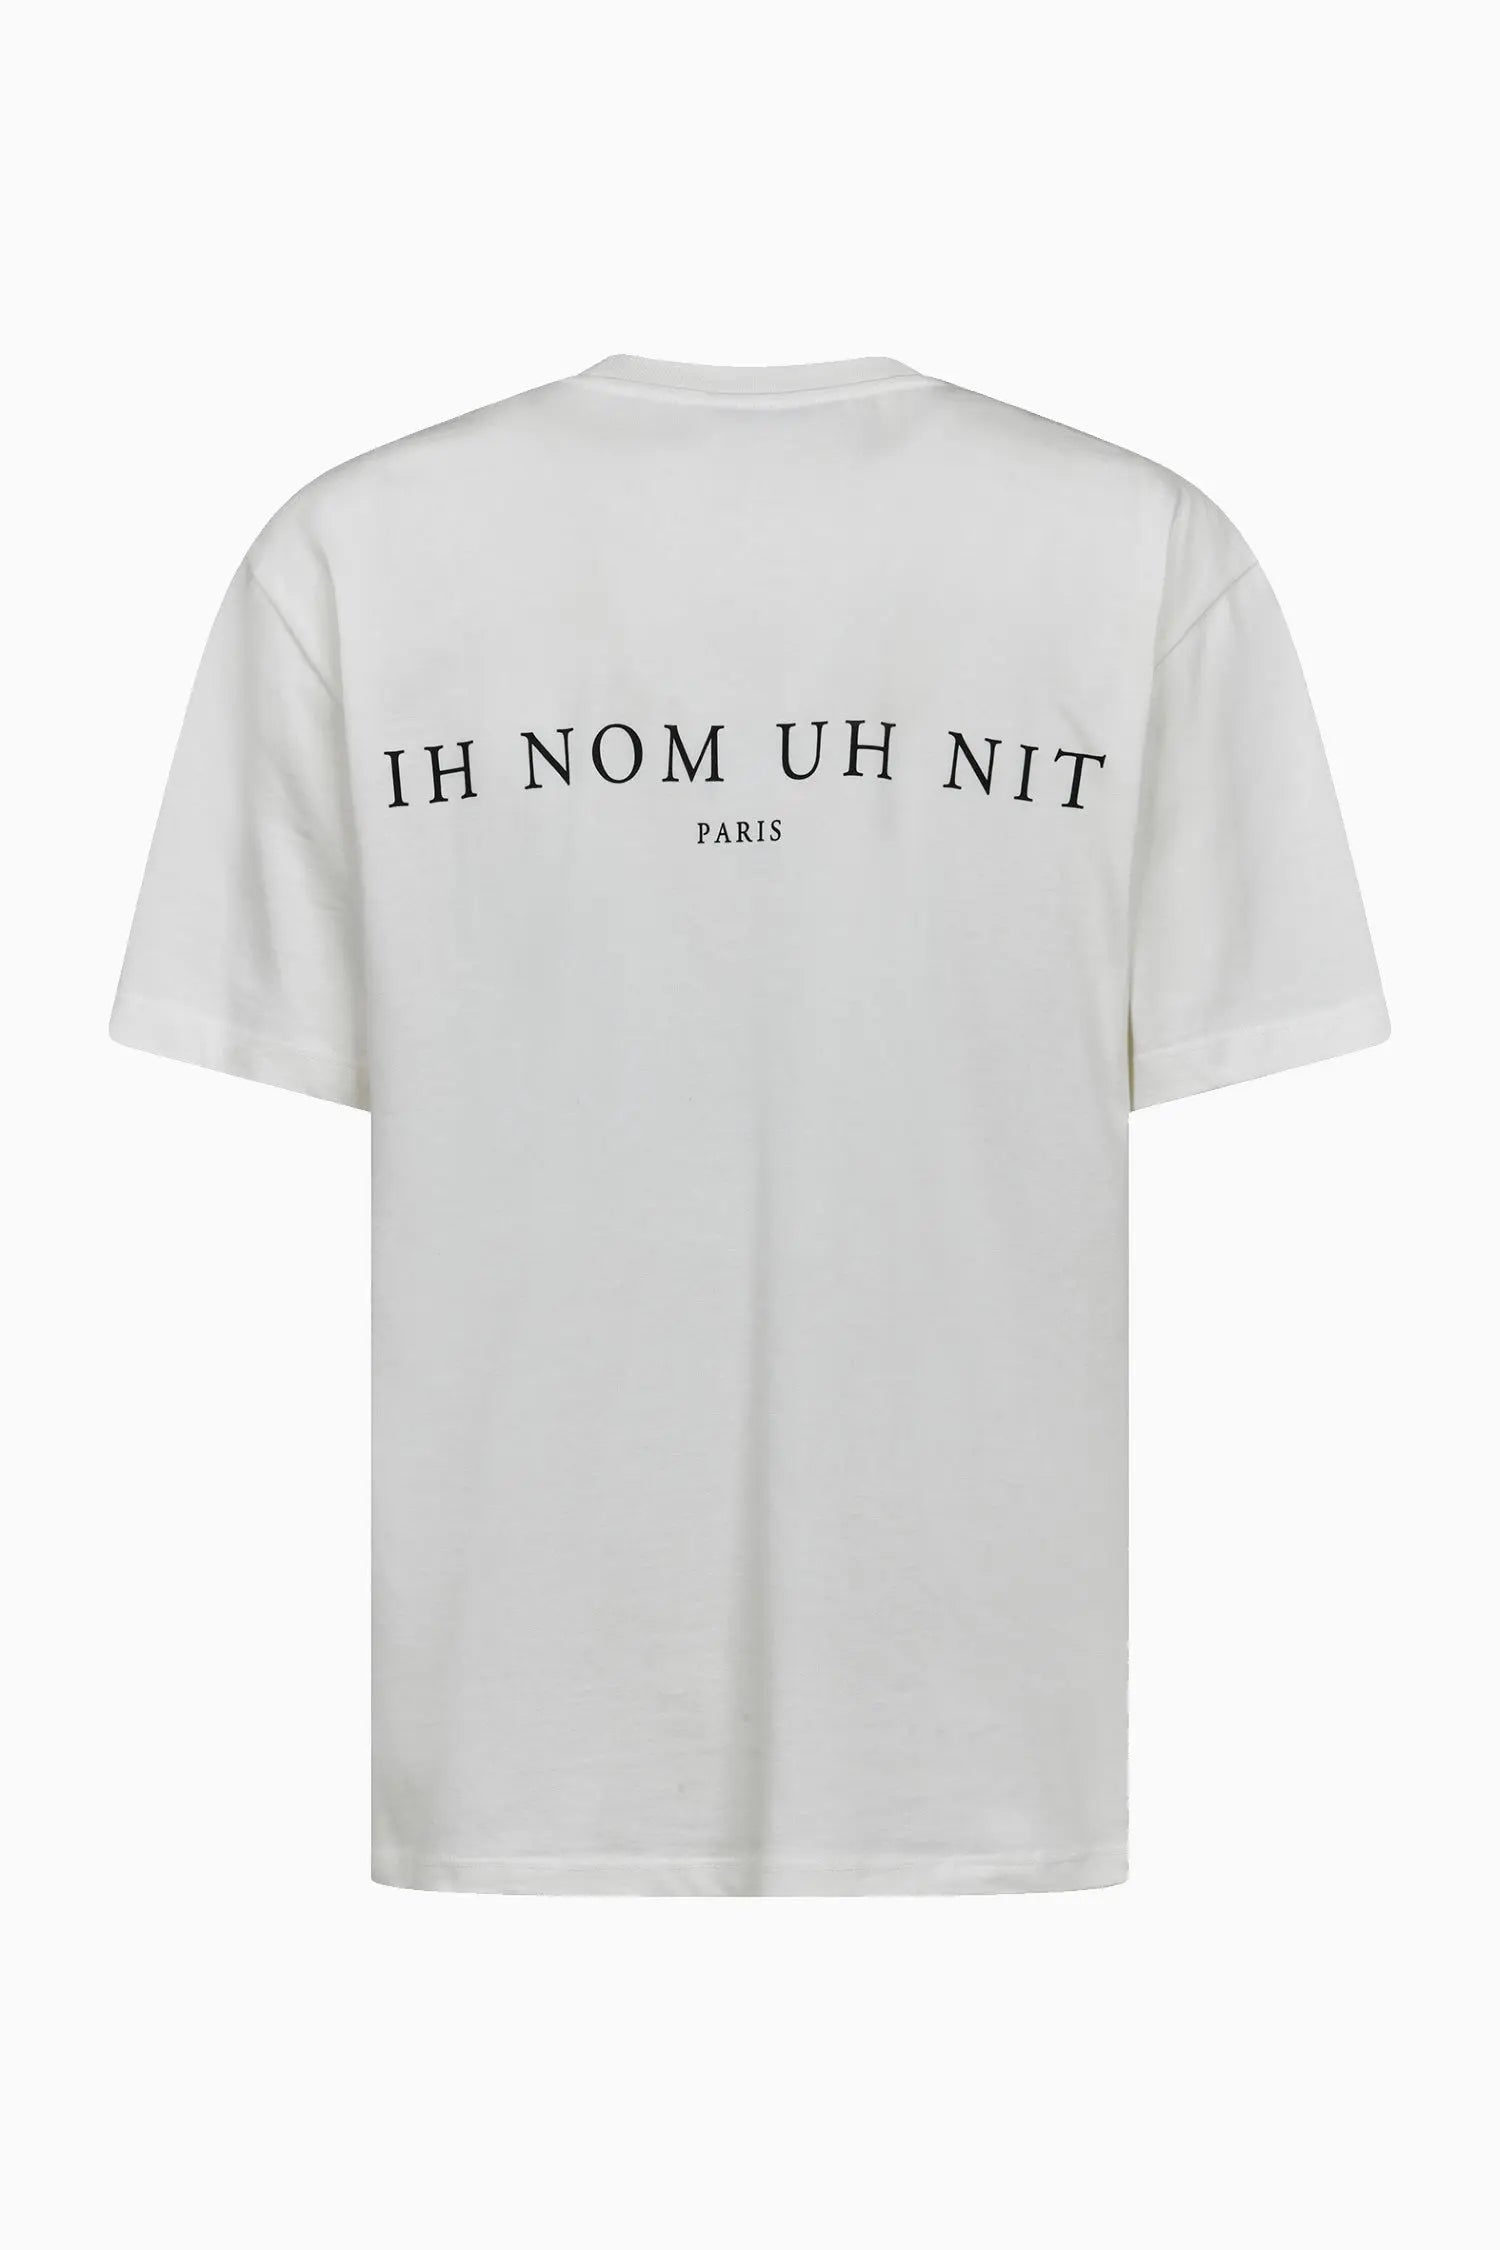 Ih Nom Uh Nit, Discover our new collection – IH NOM UH NIT